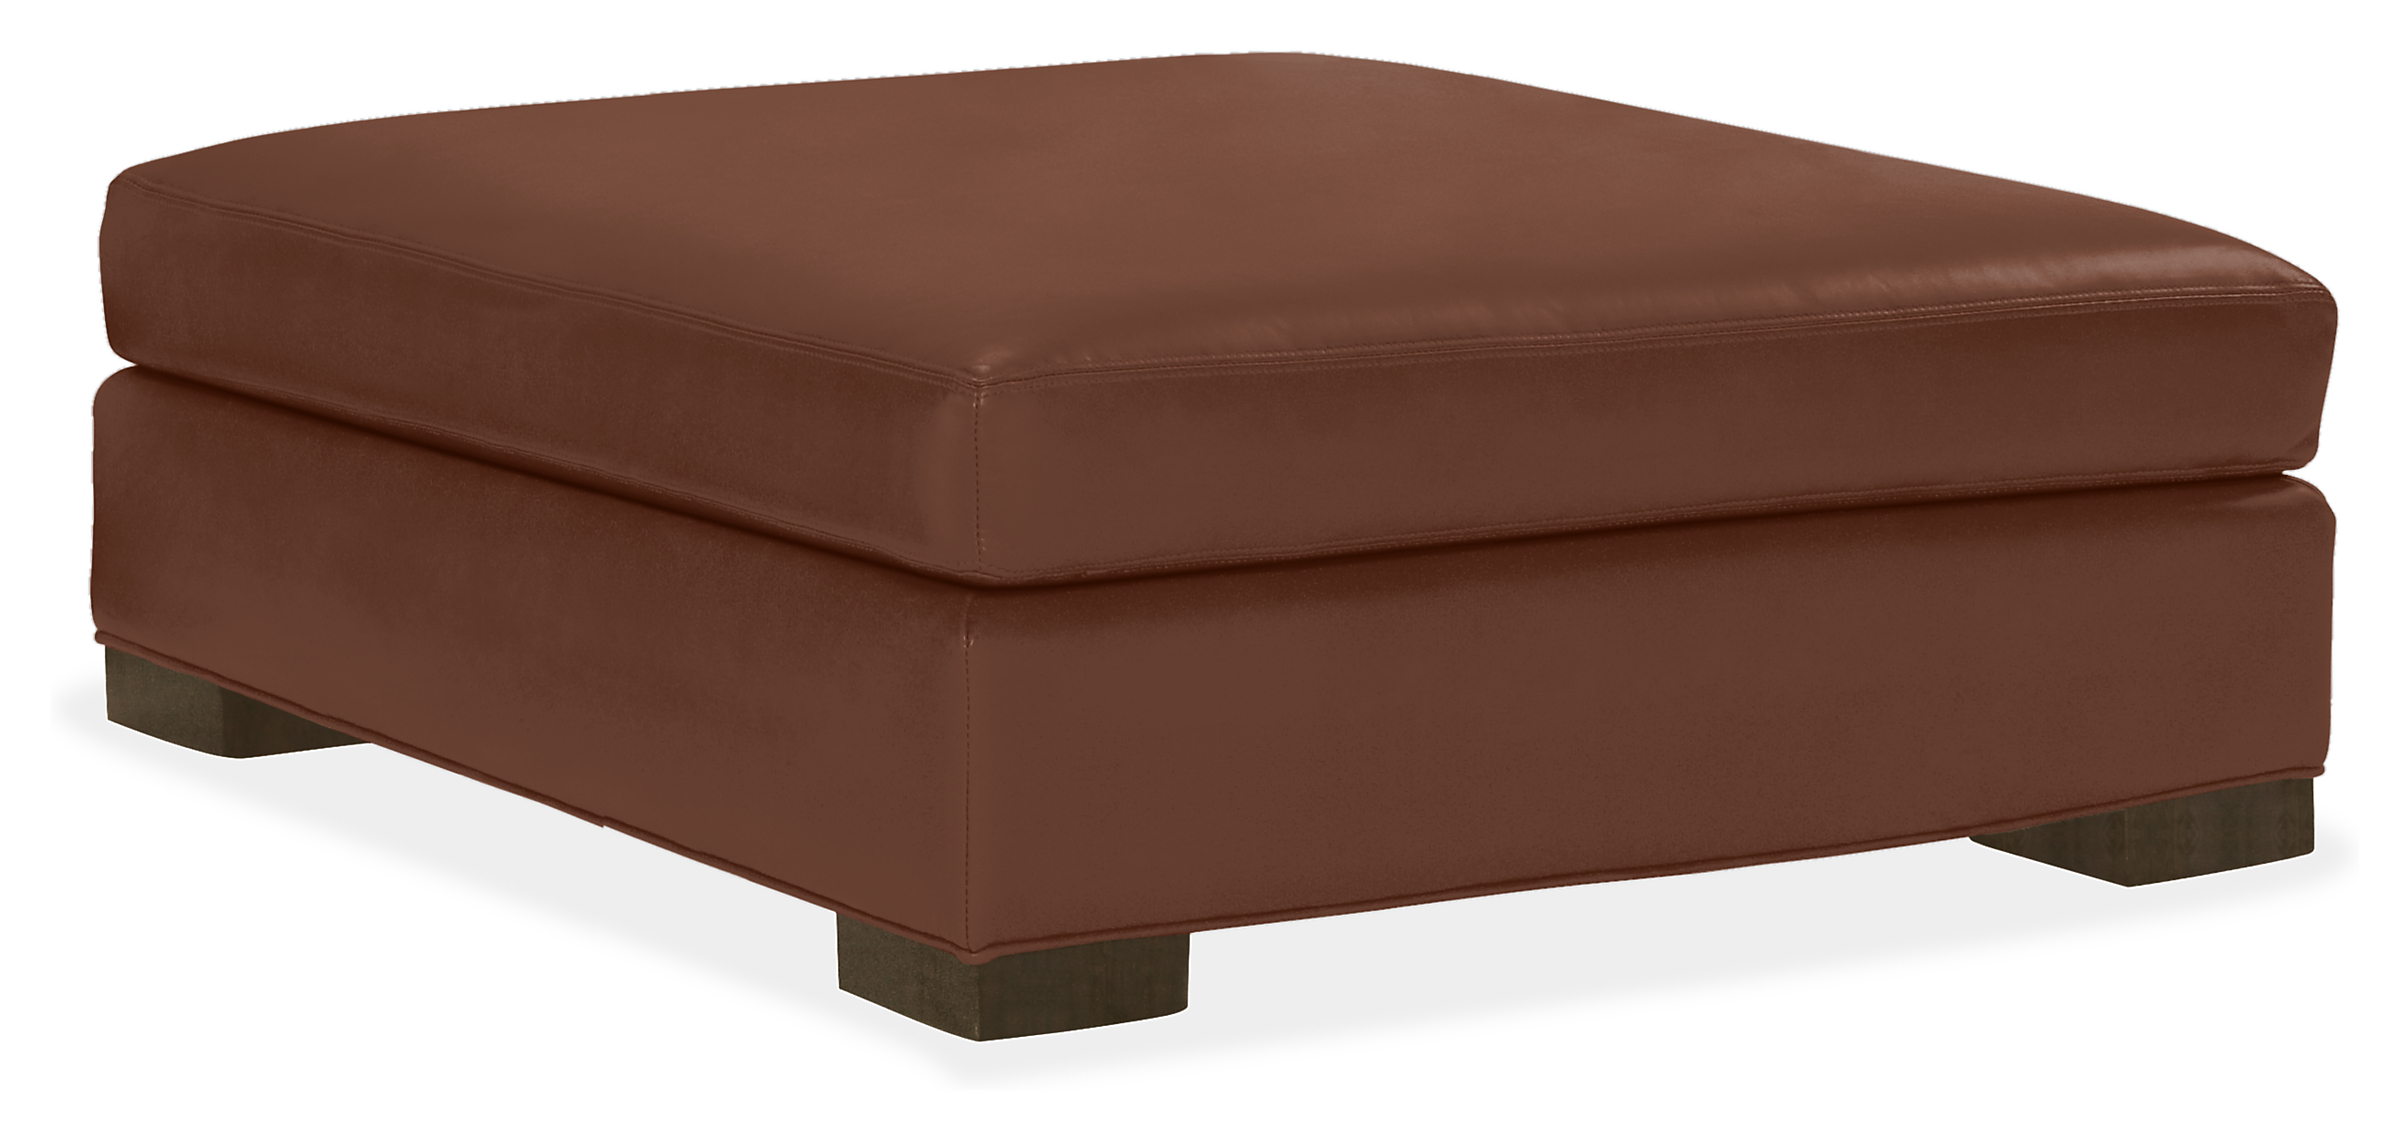 Metro Deep 43w 43d 18h Square Ottoman in Lecco Cognac Leather with Charcoal Legs